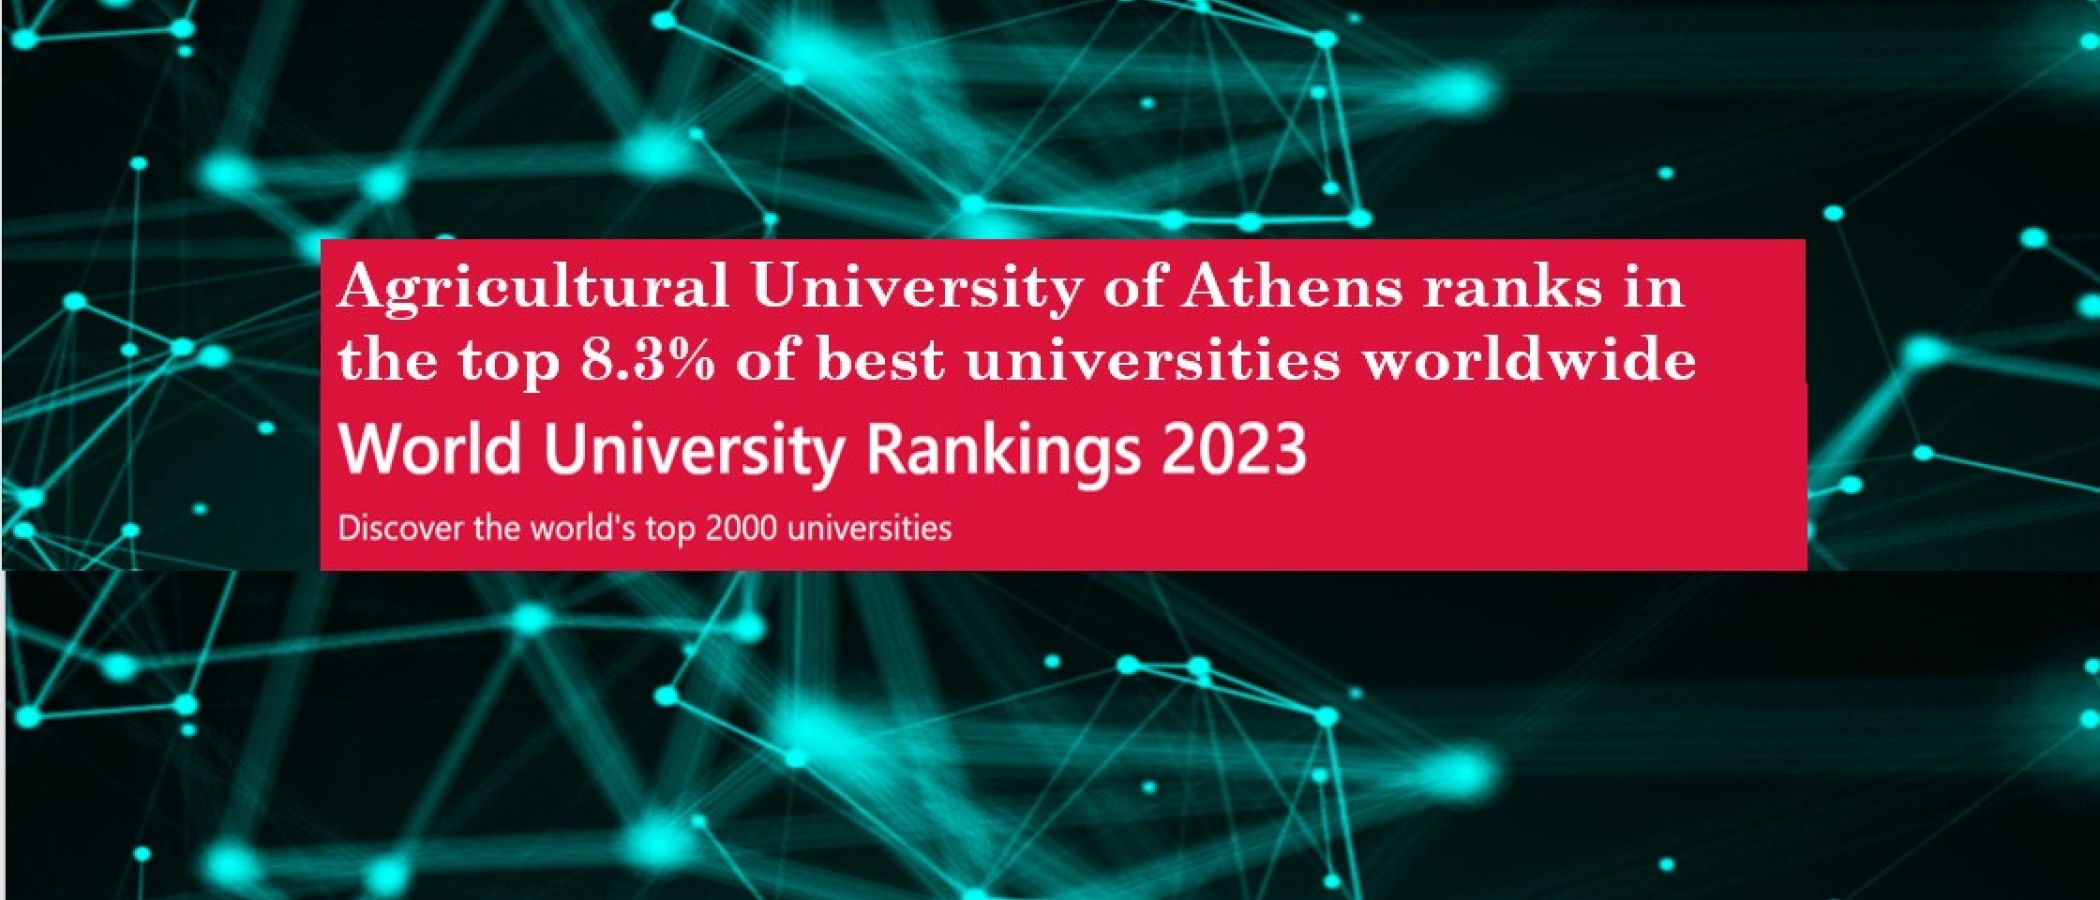 The Agricultural University of Athens ranks at 8.3% of the Top Universities worldwide